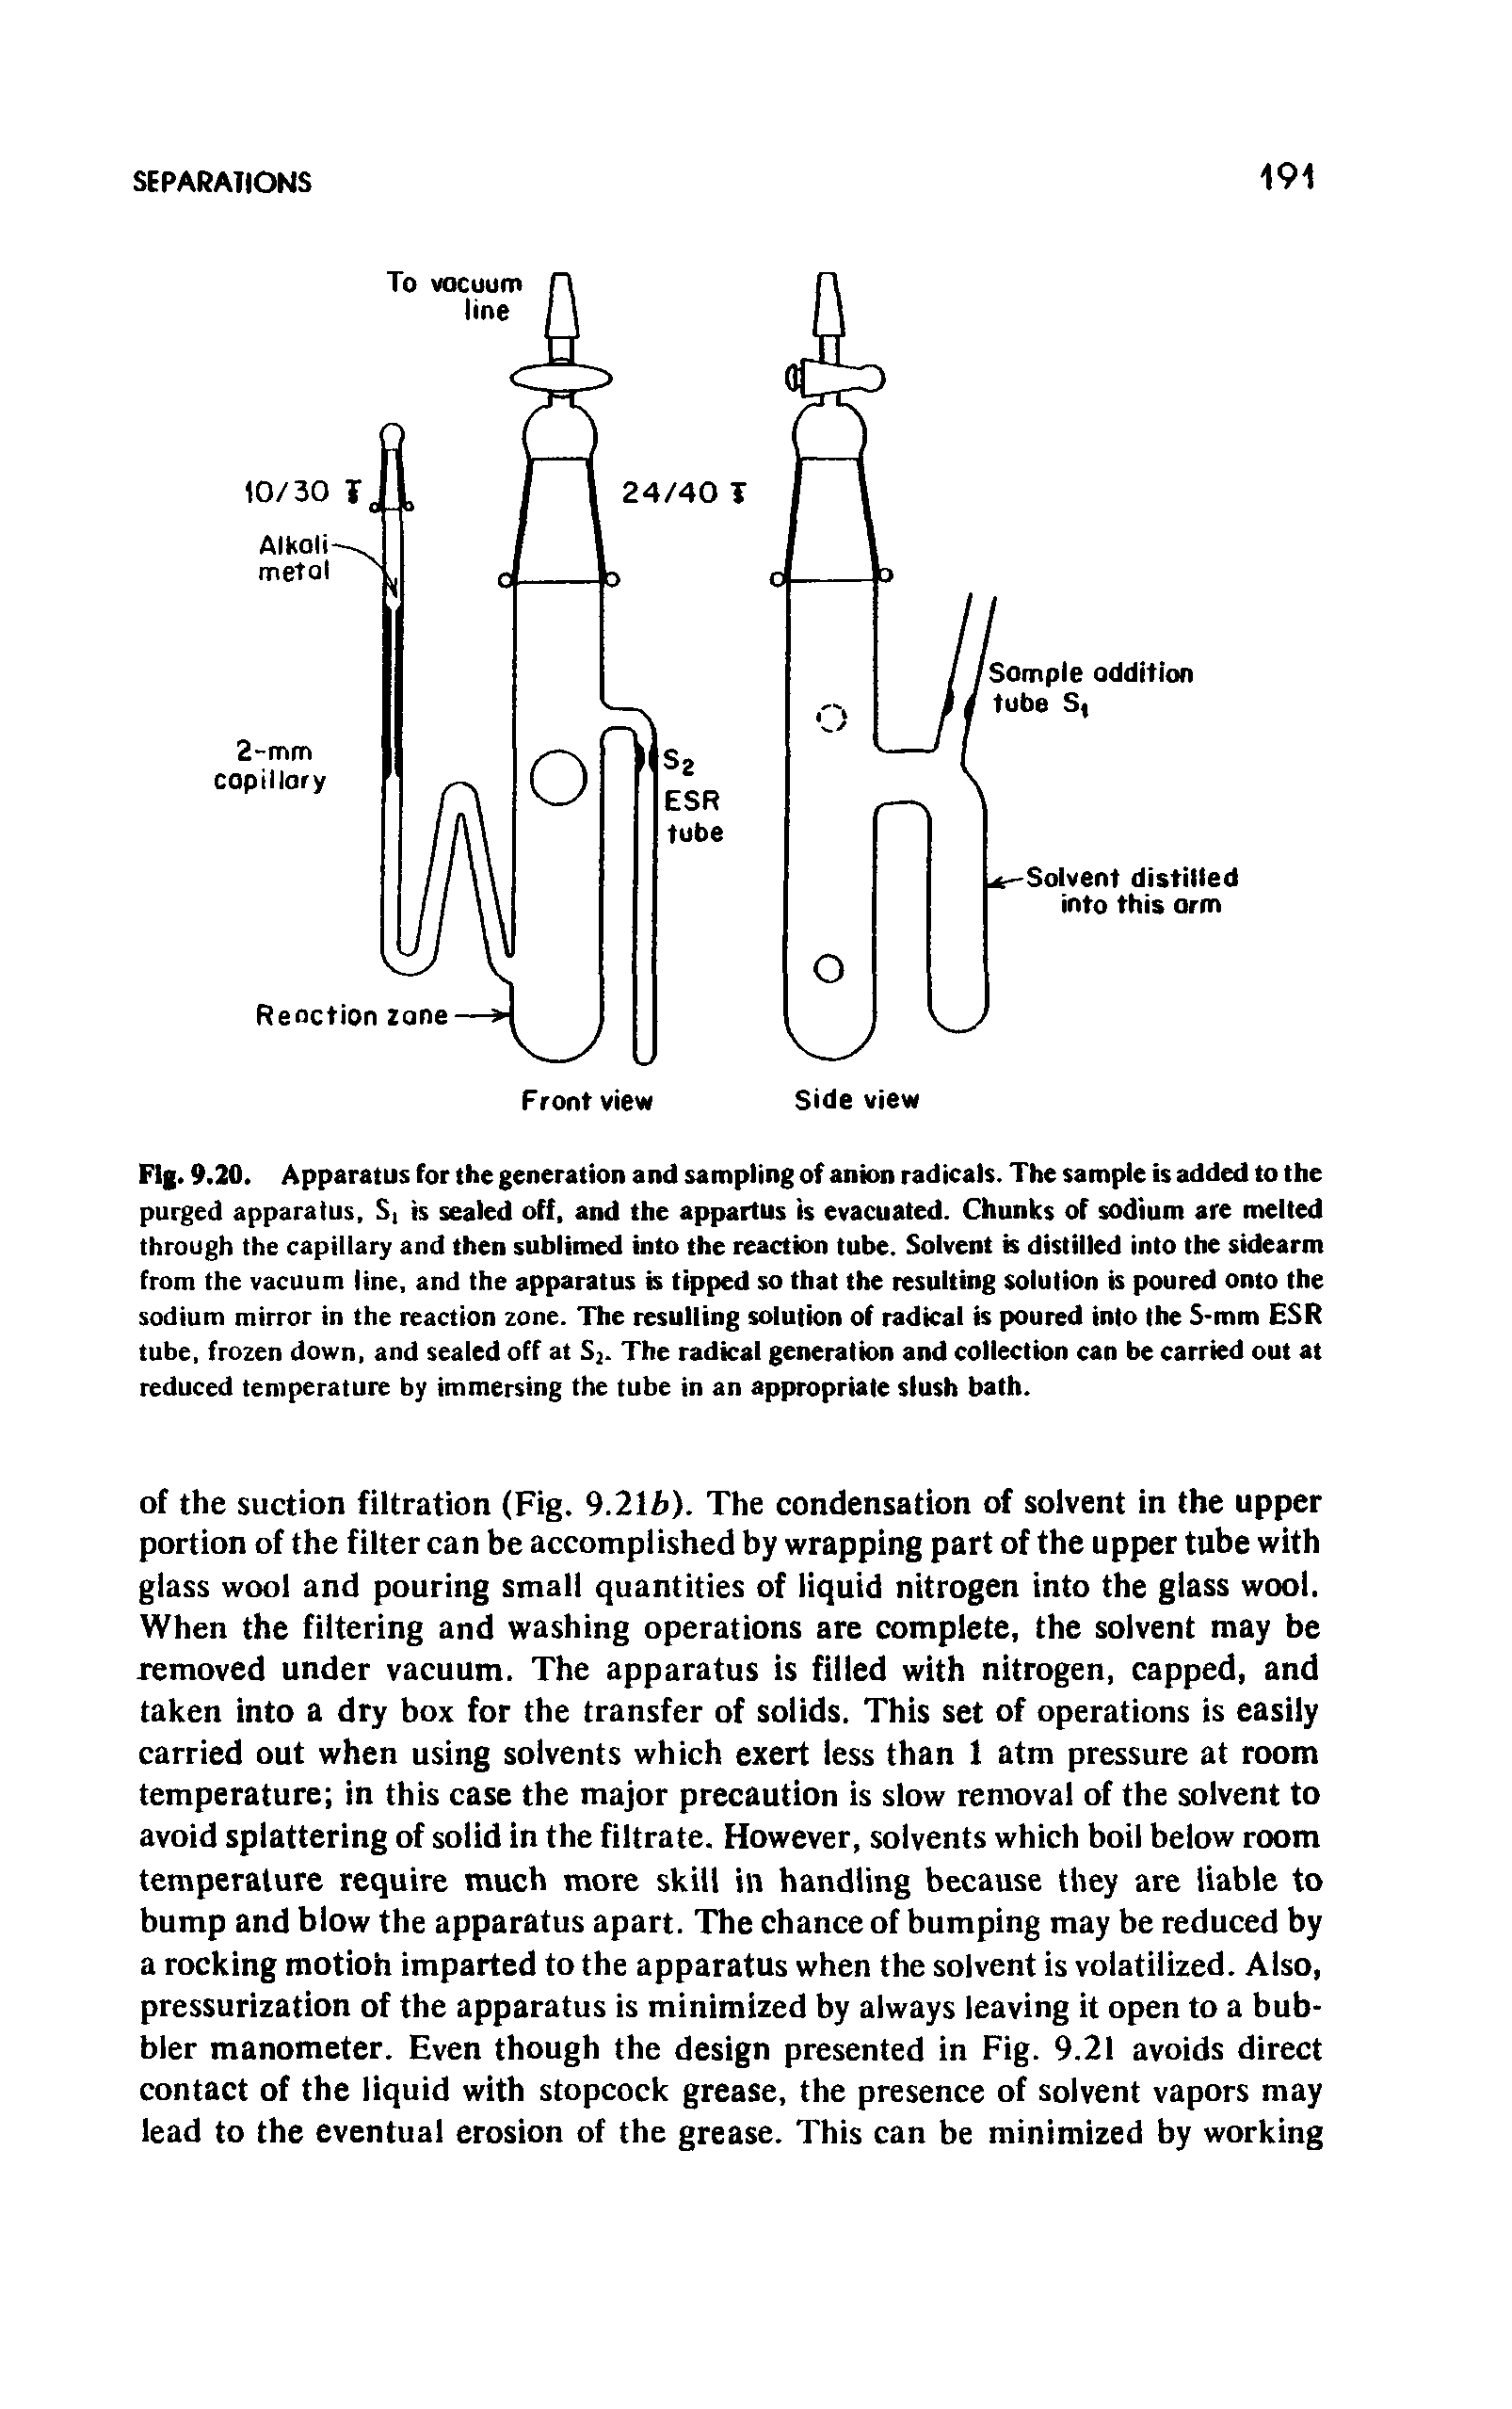 Fig. 9.20. Apparatus for the generation and sampling of anion radicals. The sample is added to the purged apparatus, S, is sealed off, and the appartus is evacuated. Chunks of sodium are melted through the capillary and then sublimed into the reaction tube. Solvent is distilled into the sidearm from the vacuum line, and the apparatus is tipped so that the resulting solution is poured onto the sodium mirror in the reaction zone. The resulting solution of radical is poured into Ihe S-mm HSR tube, frozen down, and sealed off at S2. The radical generation and collection can be carried out at reduced temperature by immersing the tube in an appropriate slush bath.